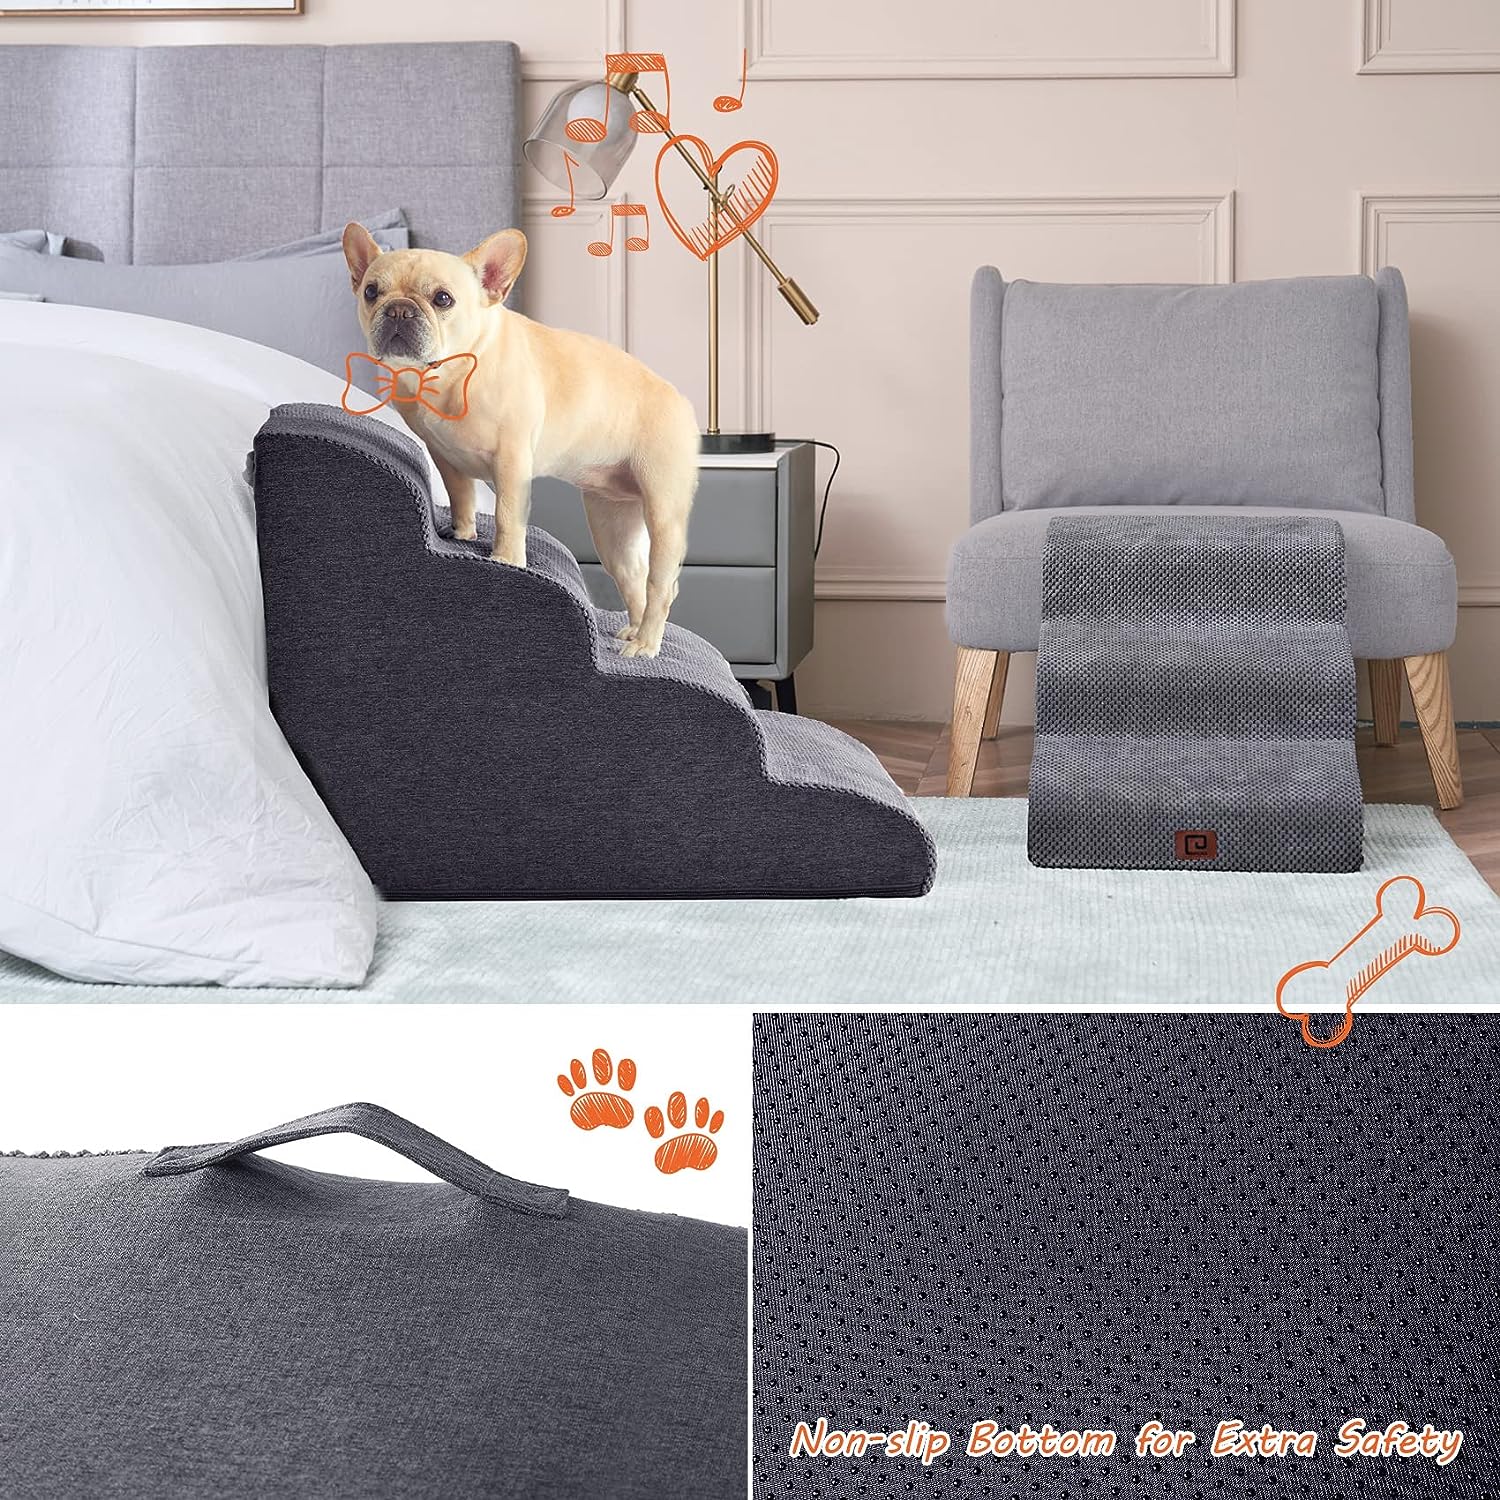 Read more about the article EHEYCIGA Dog Stairs Review